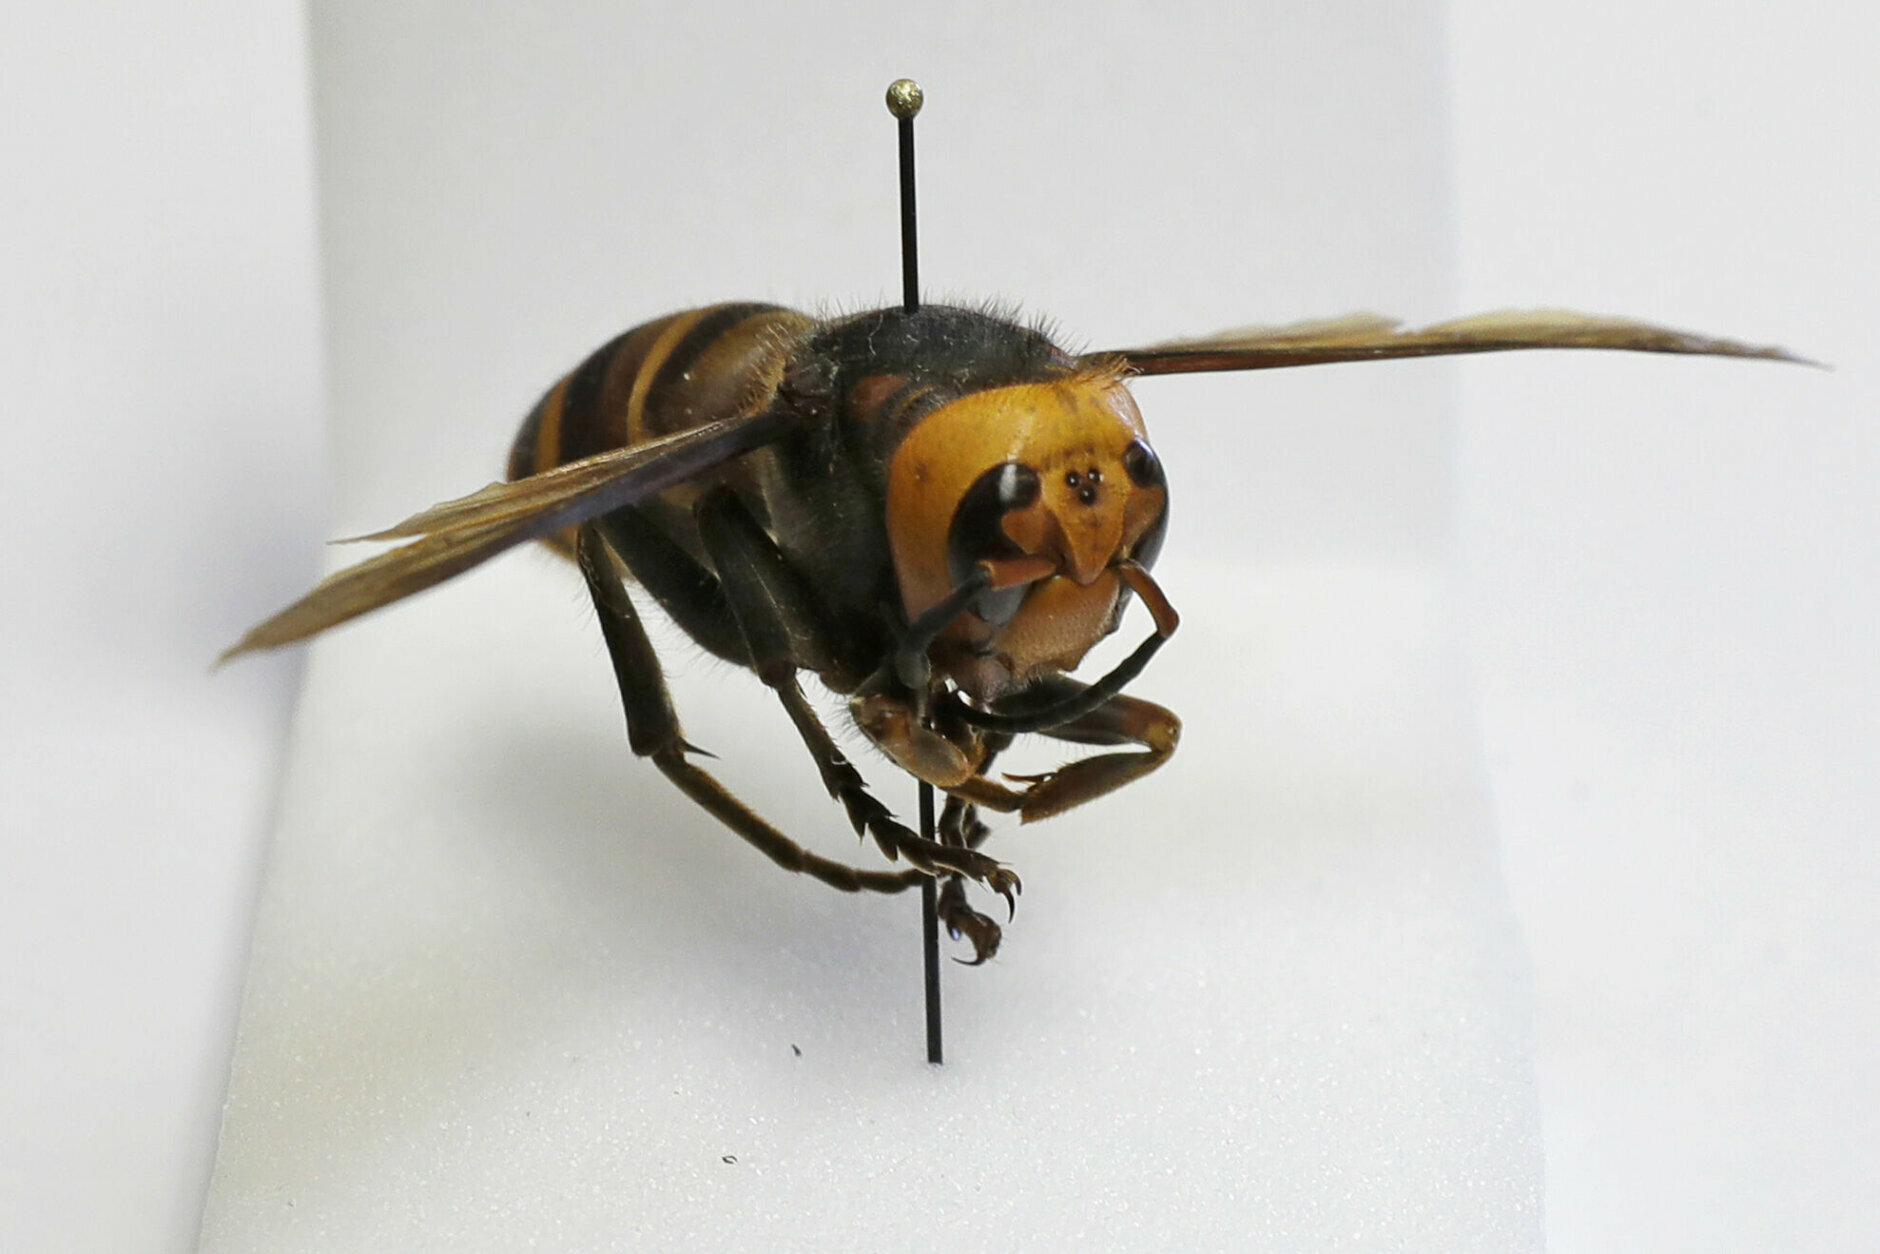 <p>An Asian giant hornet from Japan is displayed on a pin at the Washington state Department of Agriculture, Monday, May 4, 2020, in Olympia, Wash. The insect, which has been found in Washington state, is the world&#8217;s largest hornet, and has been dubbed the &#8220;Murder Hornet&#8221; in reference to its appetite for honey bees, and a sting that can be fatal to some people. (AP Photo/Ted S. Warren)</p>
